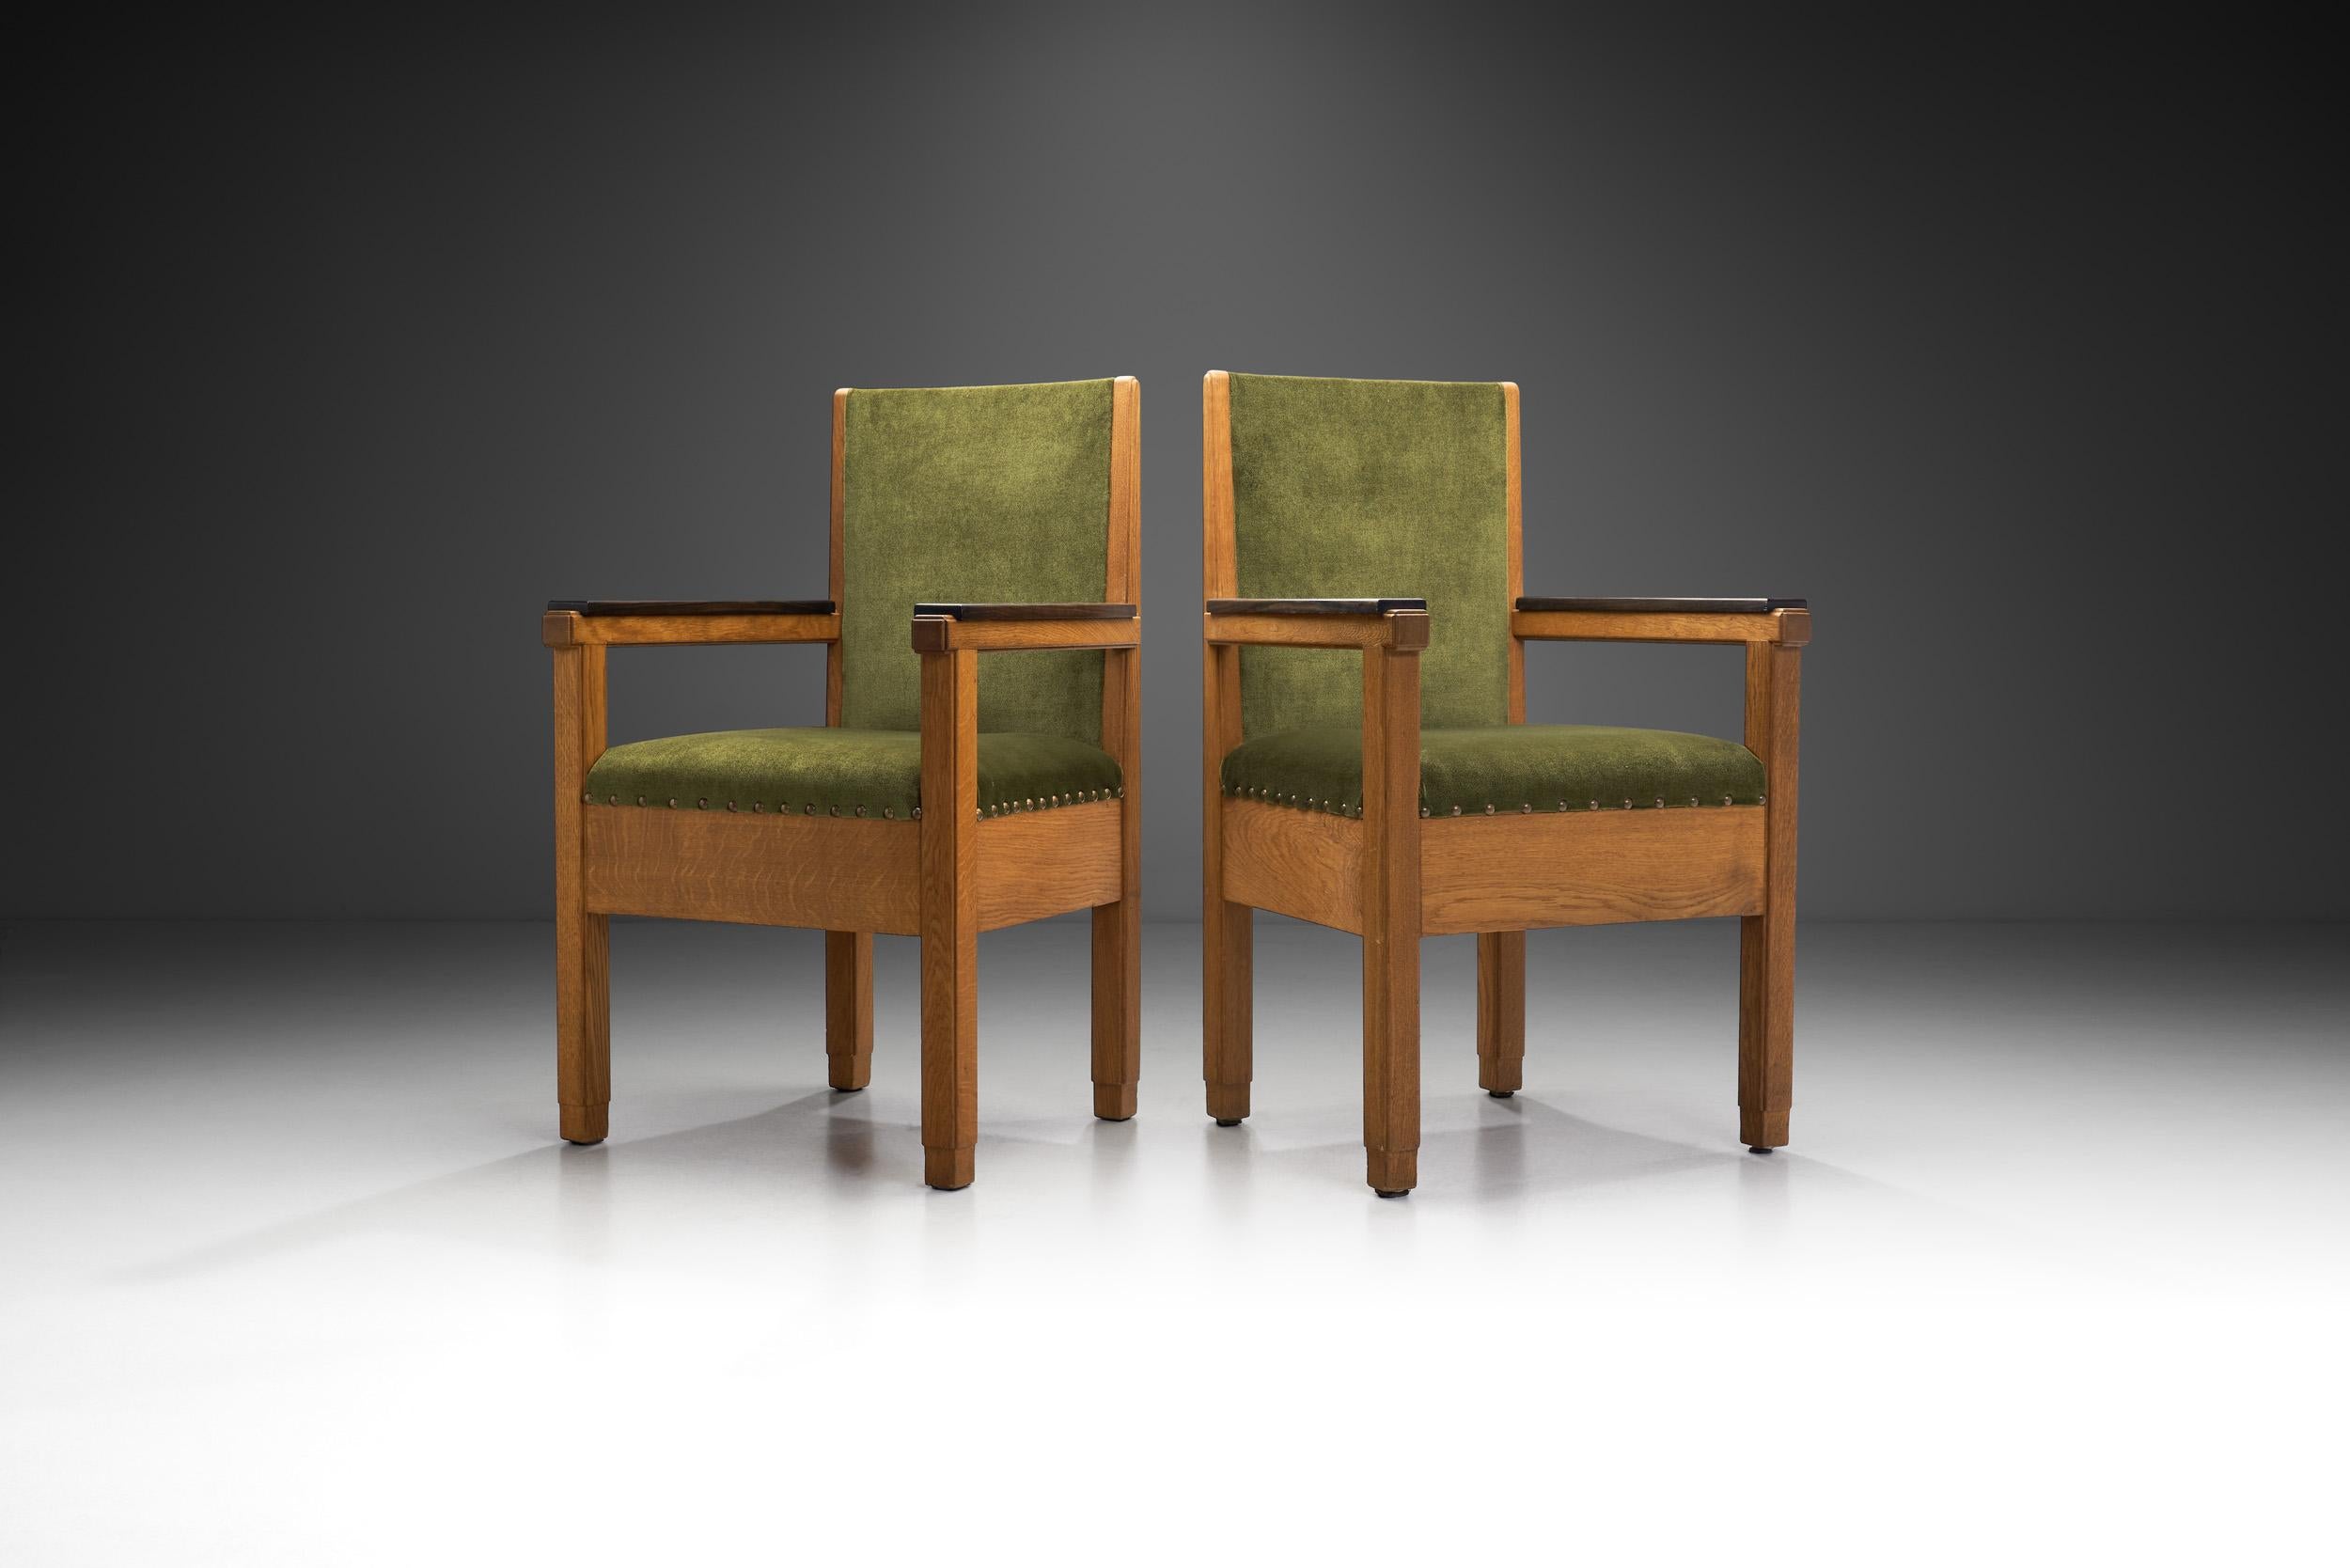 Art Deco Upholstered Amsterdamse School Chairs, The Netherlands Early 20th Century For Sale